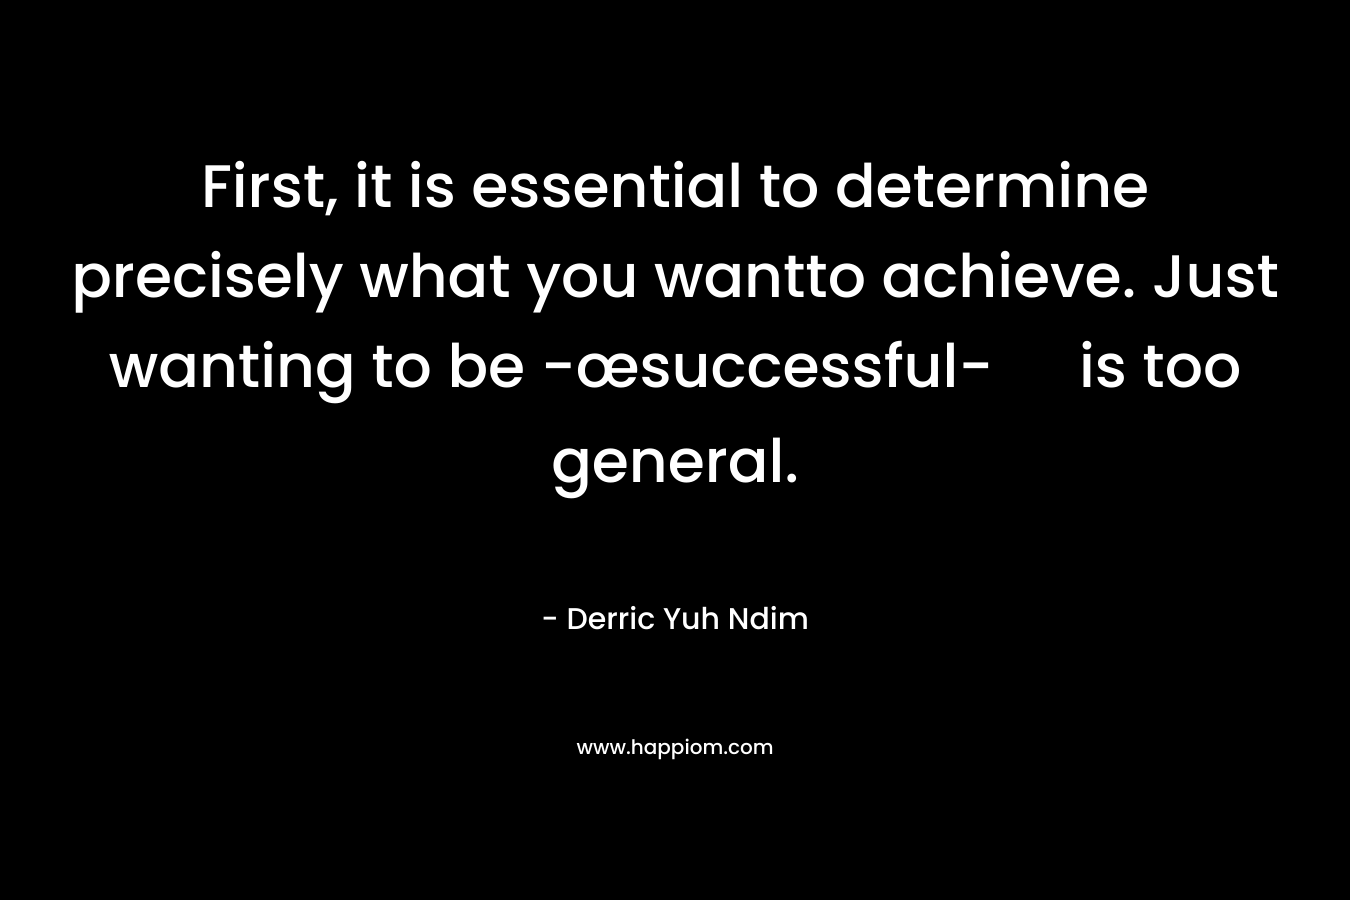 First, it is essential to determine precisely what you wantto achieve. Just wanting to be -œsuccessful- is too general.